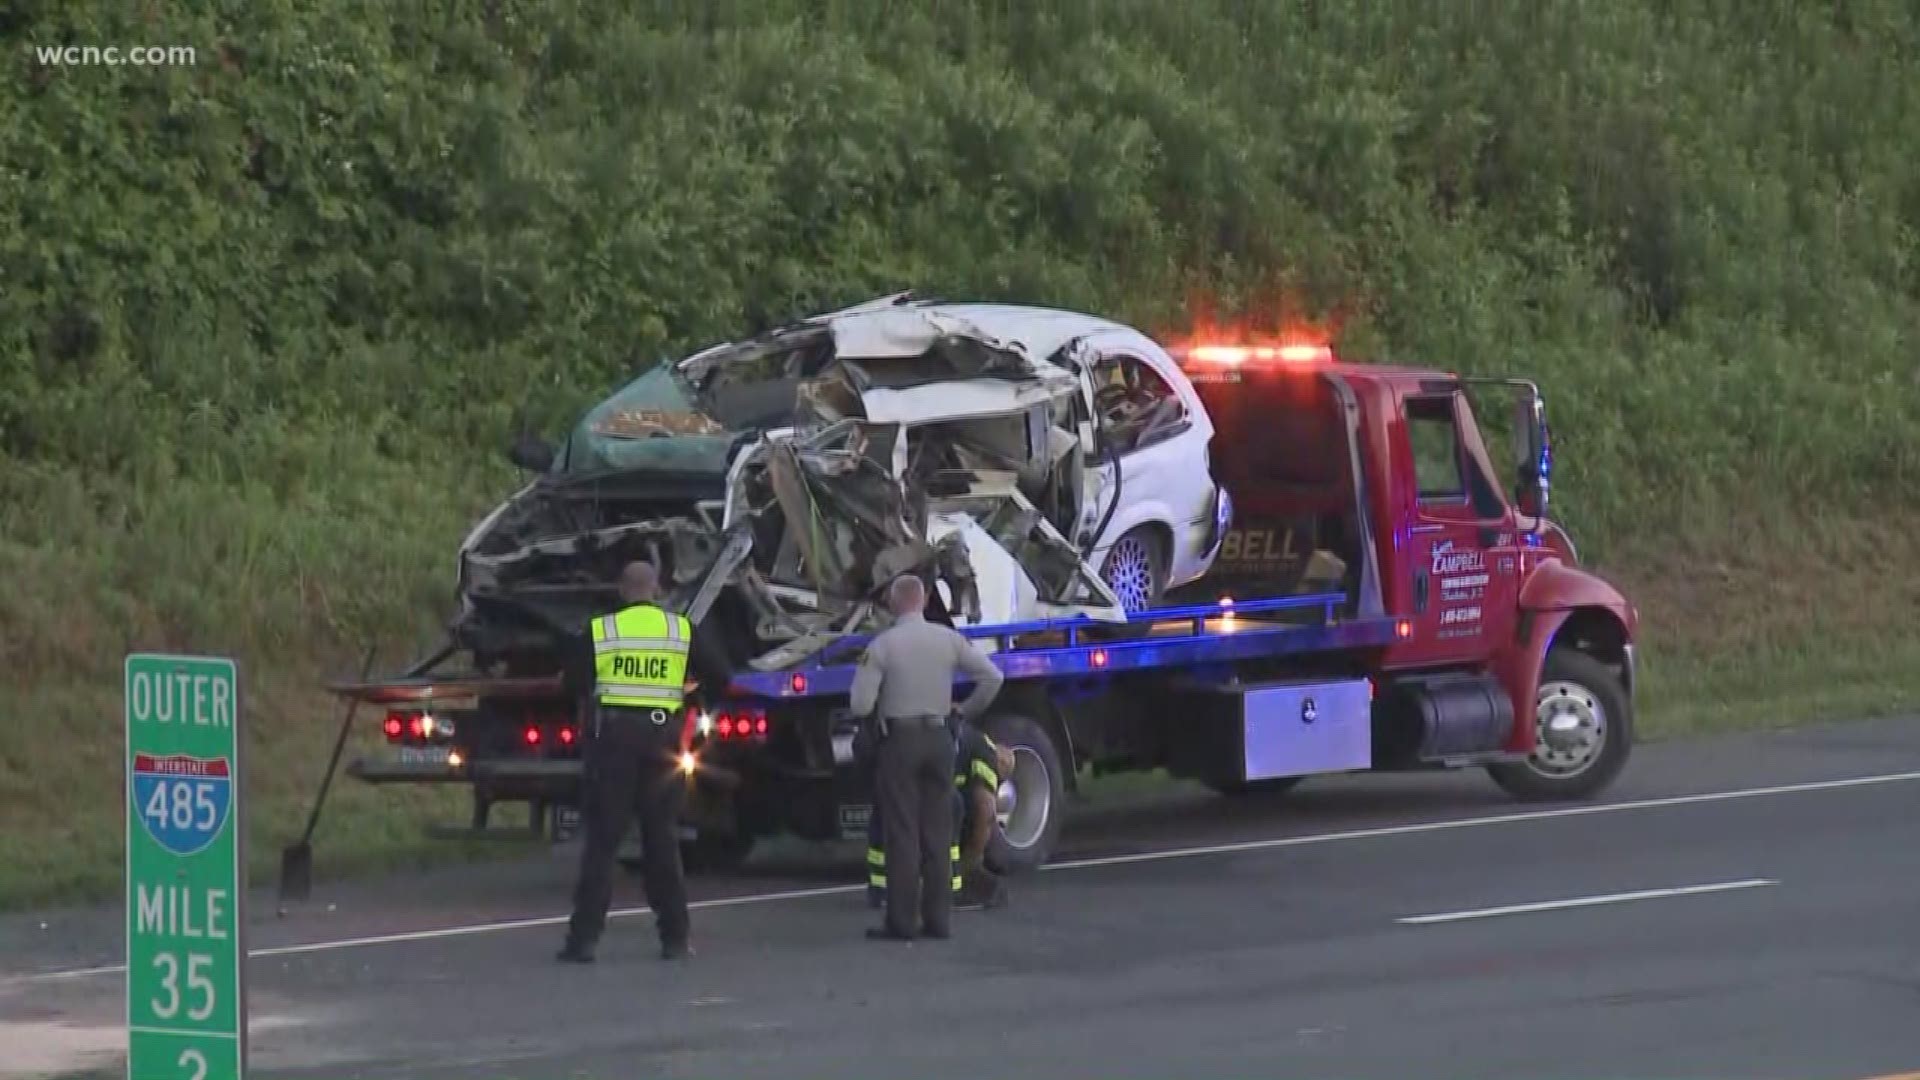 One person was killed in a crash on I-485 near University City Boulevard early Wednesday morning.